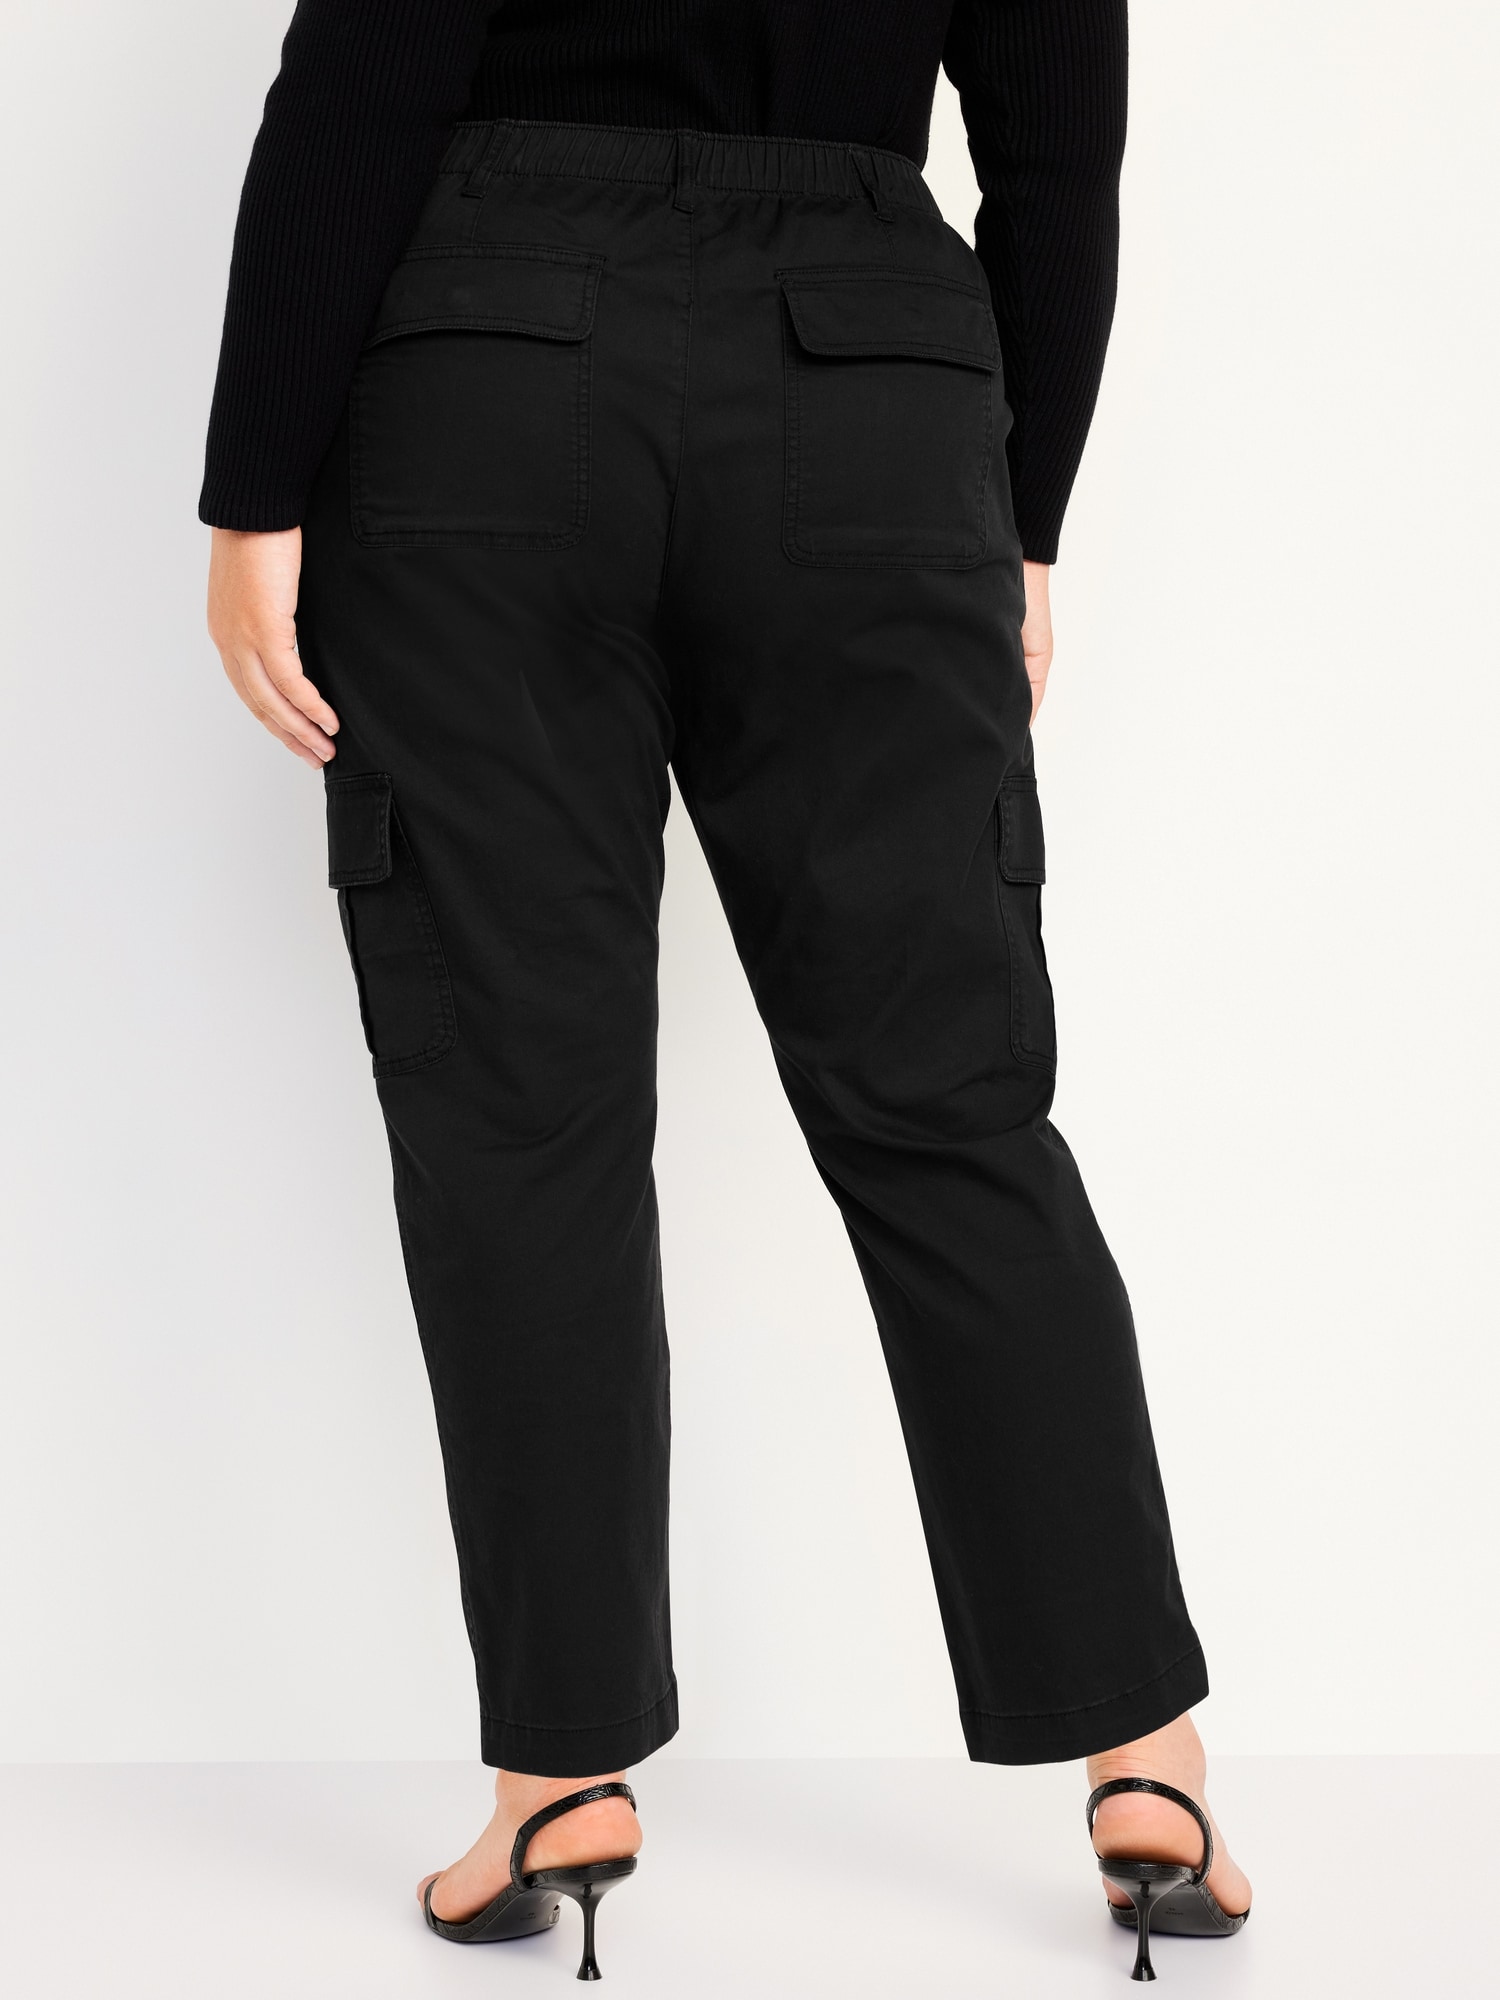 Women's Effortless Chino Cargo Pants - A New Day™ Black 14